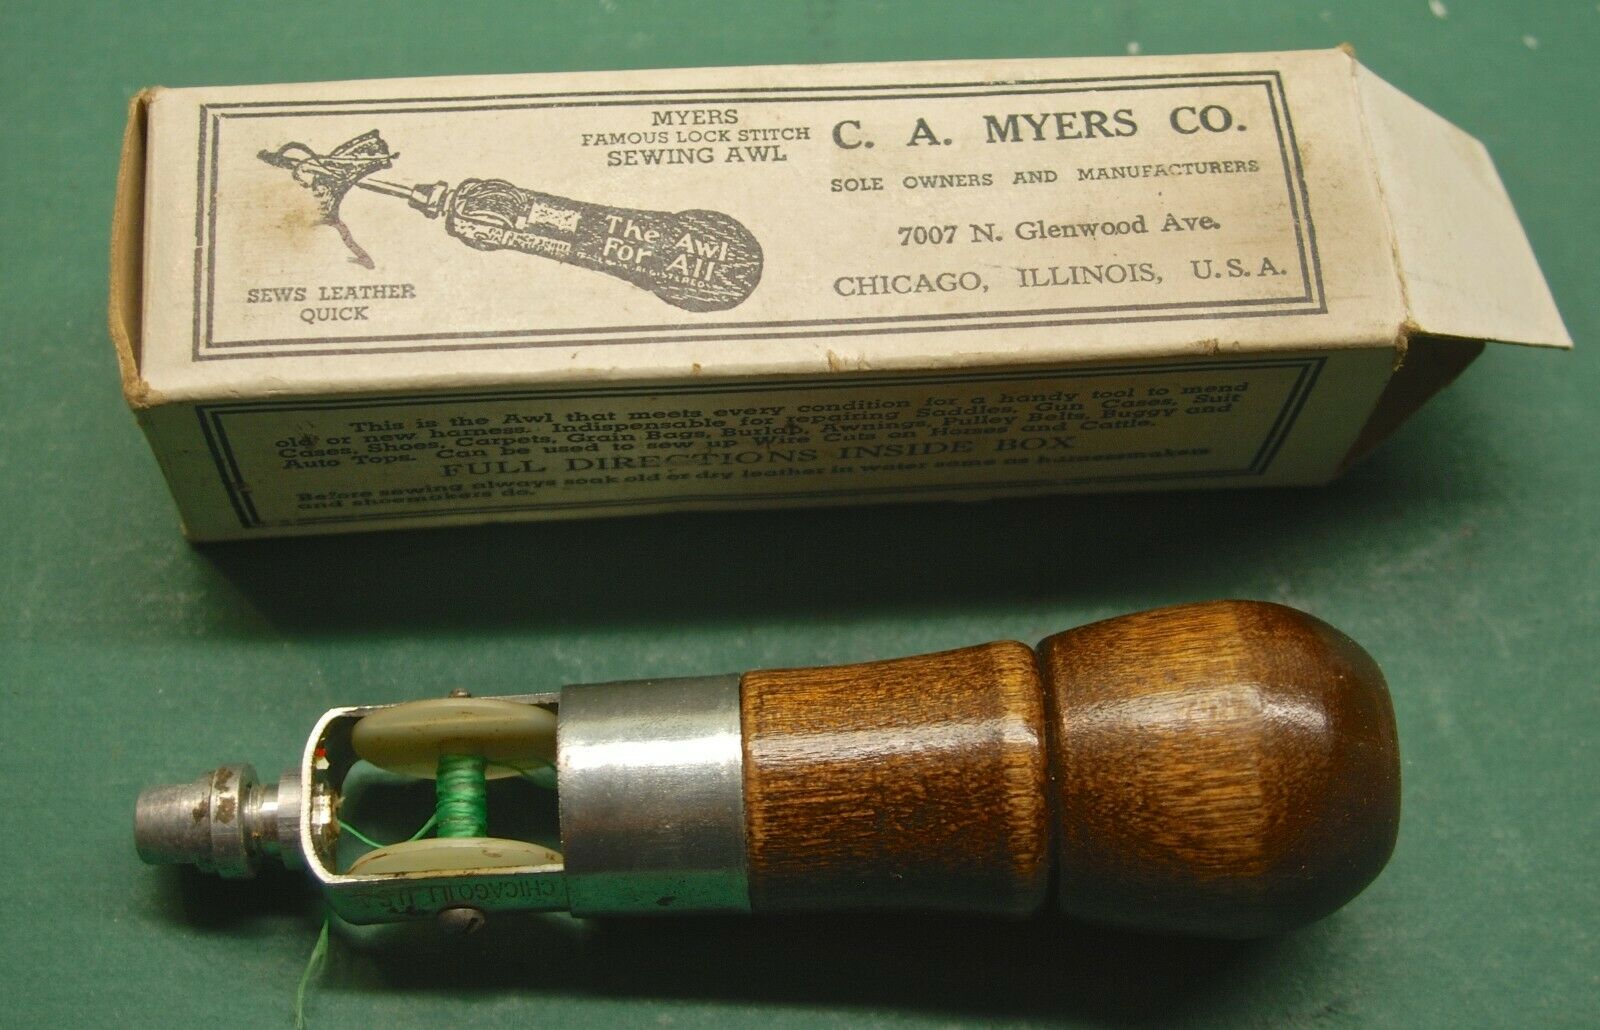 Vintage C.a.myers Co. Lock Stitch Combo Sewing Awl Has Original Box & Directions